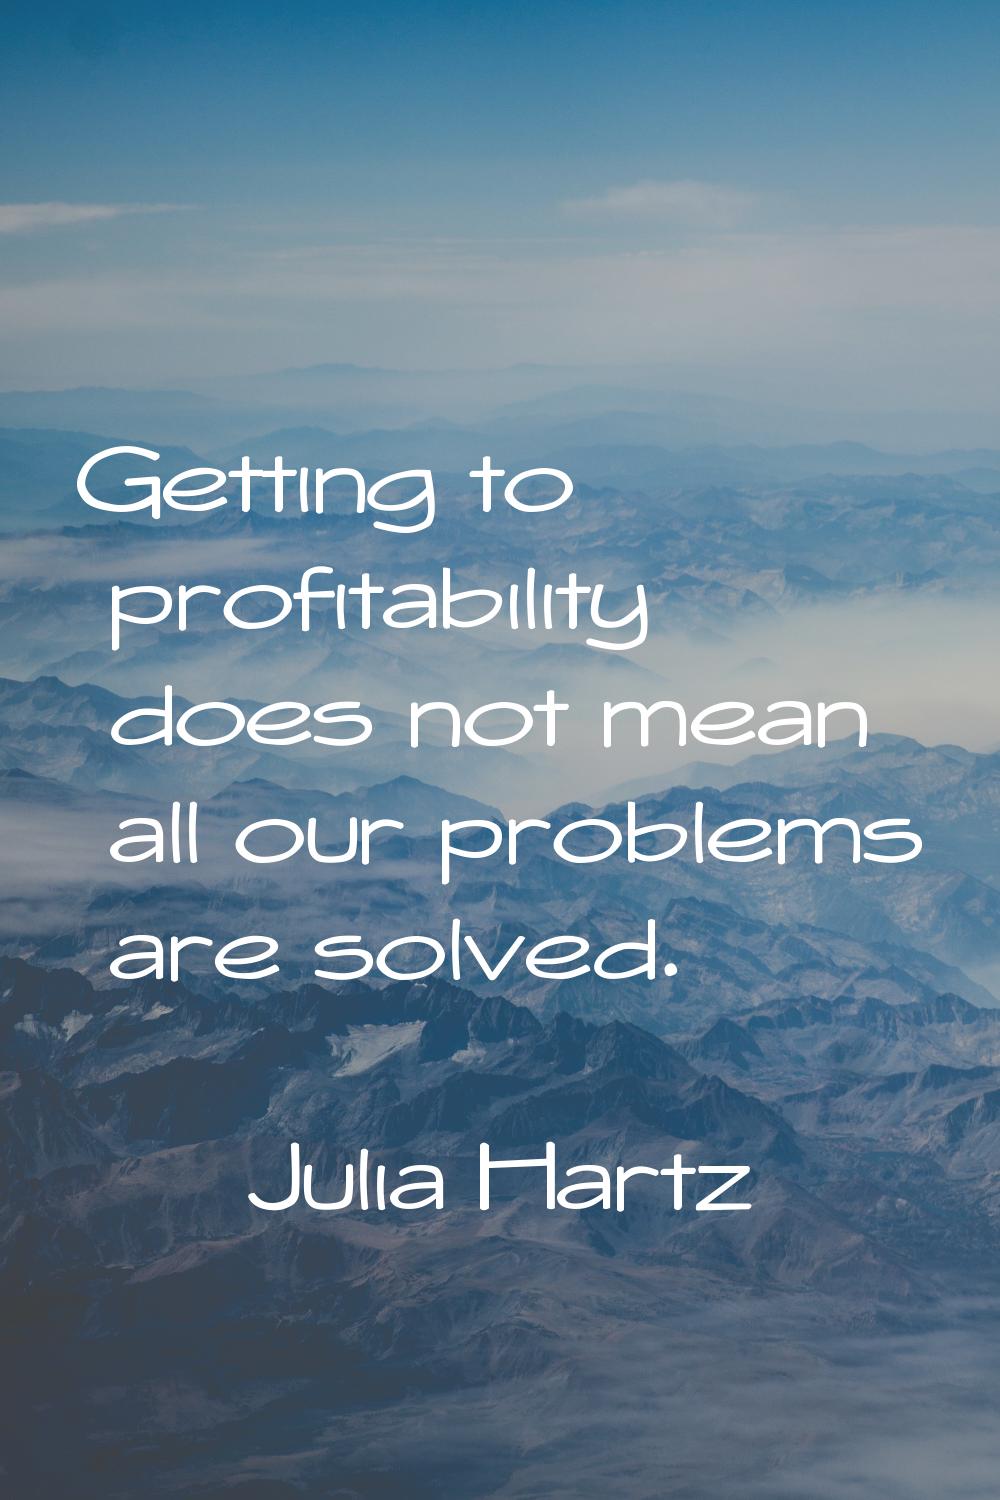 Getting to profitability does not mean all our problems are solved.